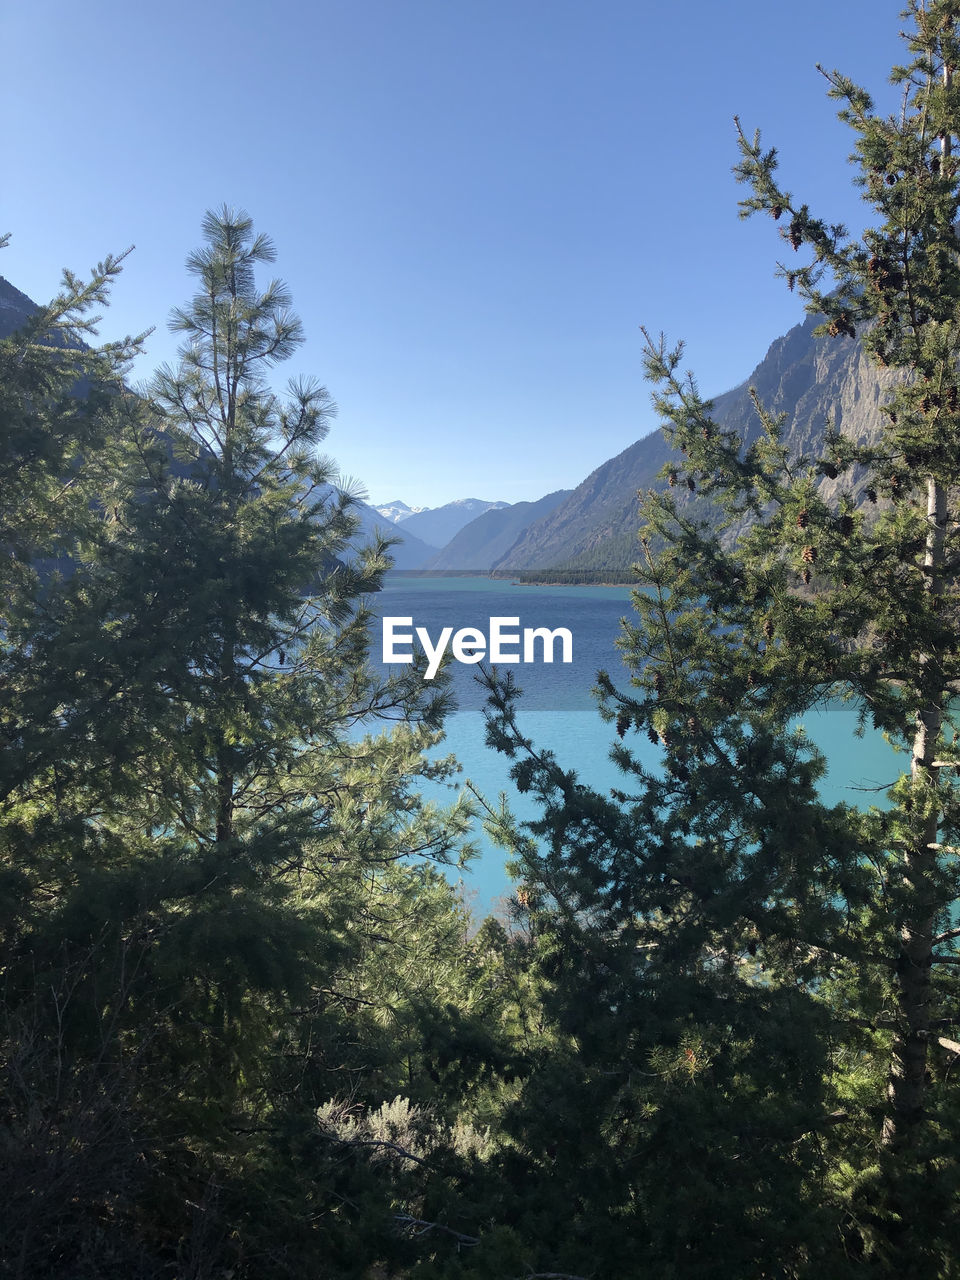 A view at seton lake campsite in lillooet, bc, canada